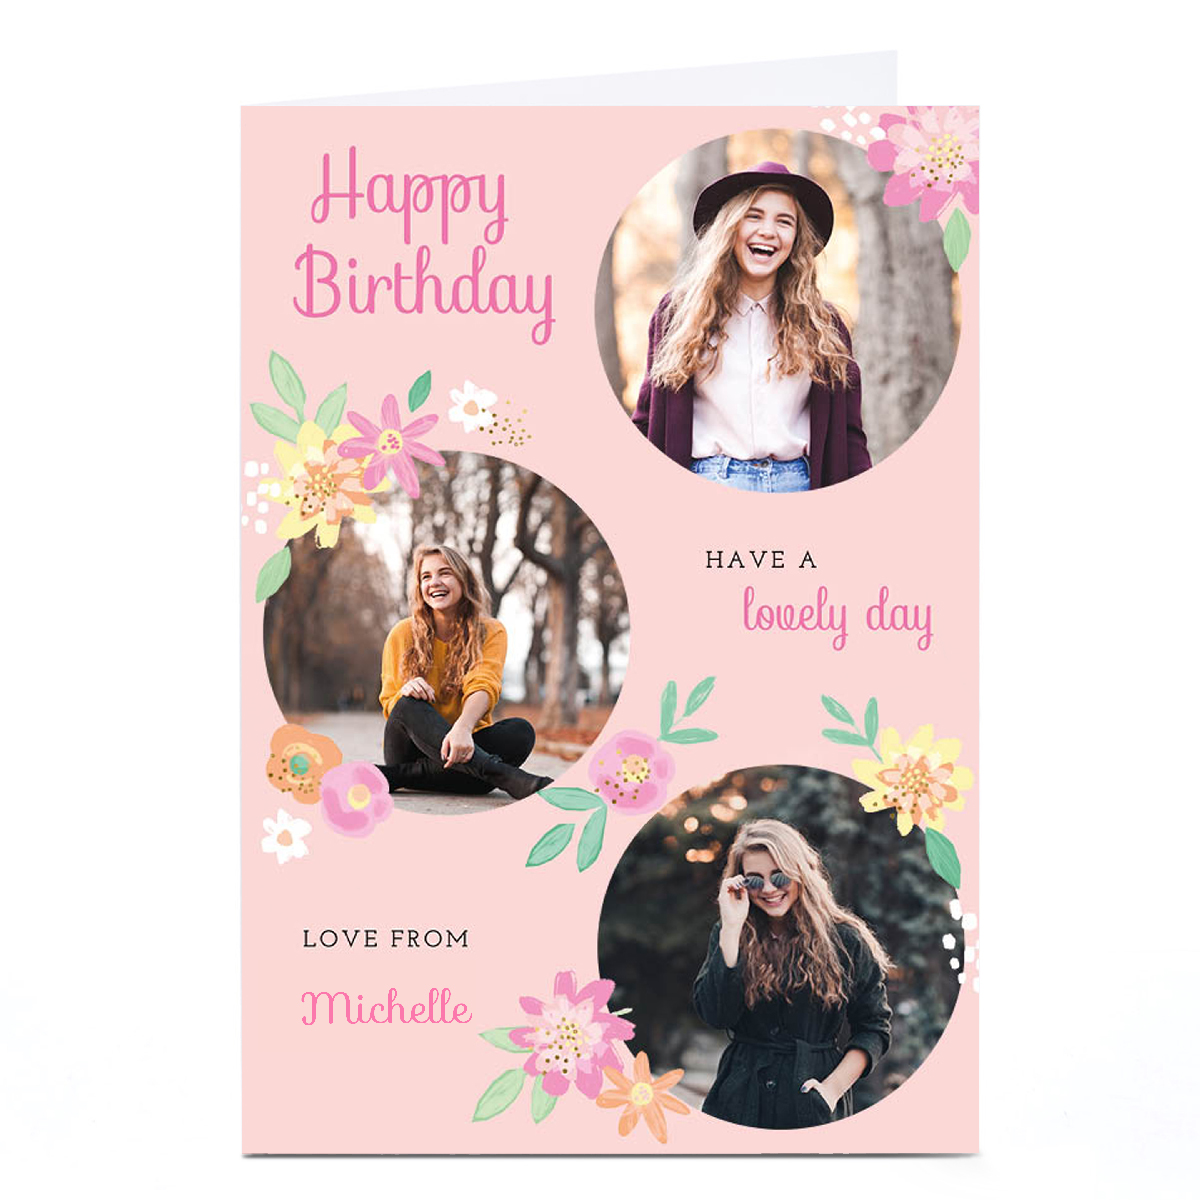 Photo Kerry Spurling Birthday Card - Pink and Yellow Flowers